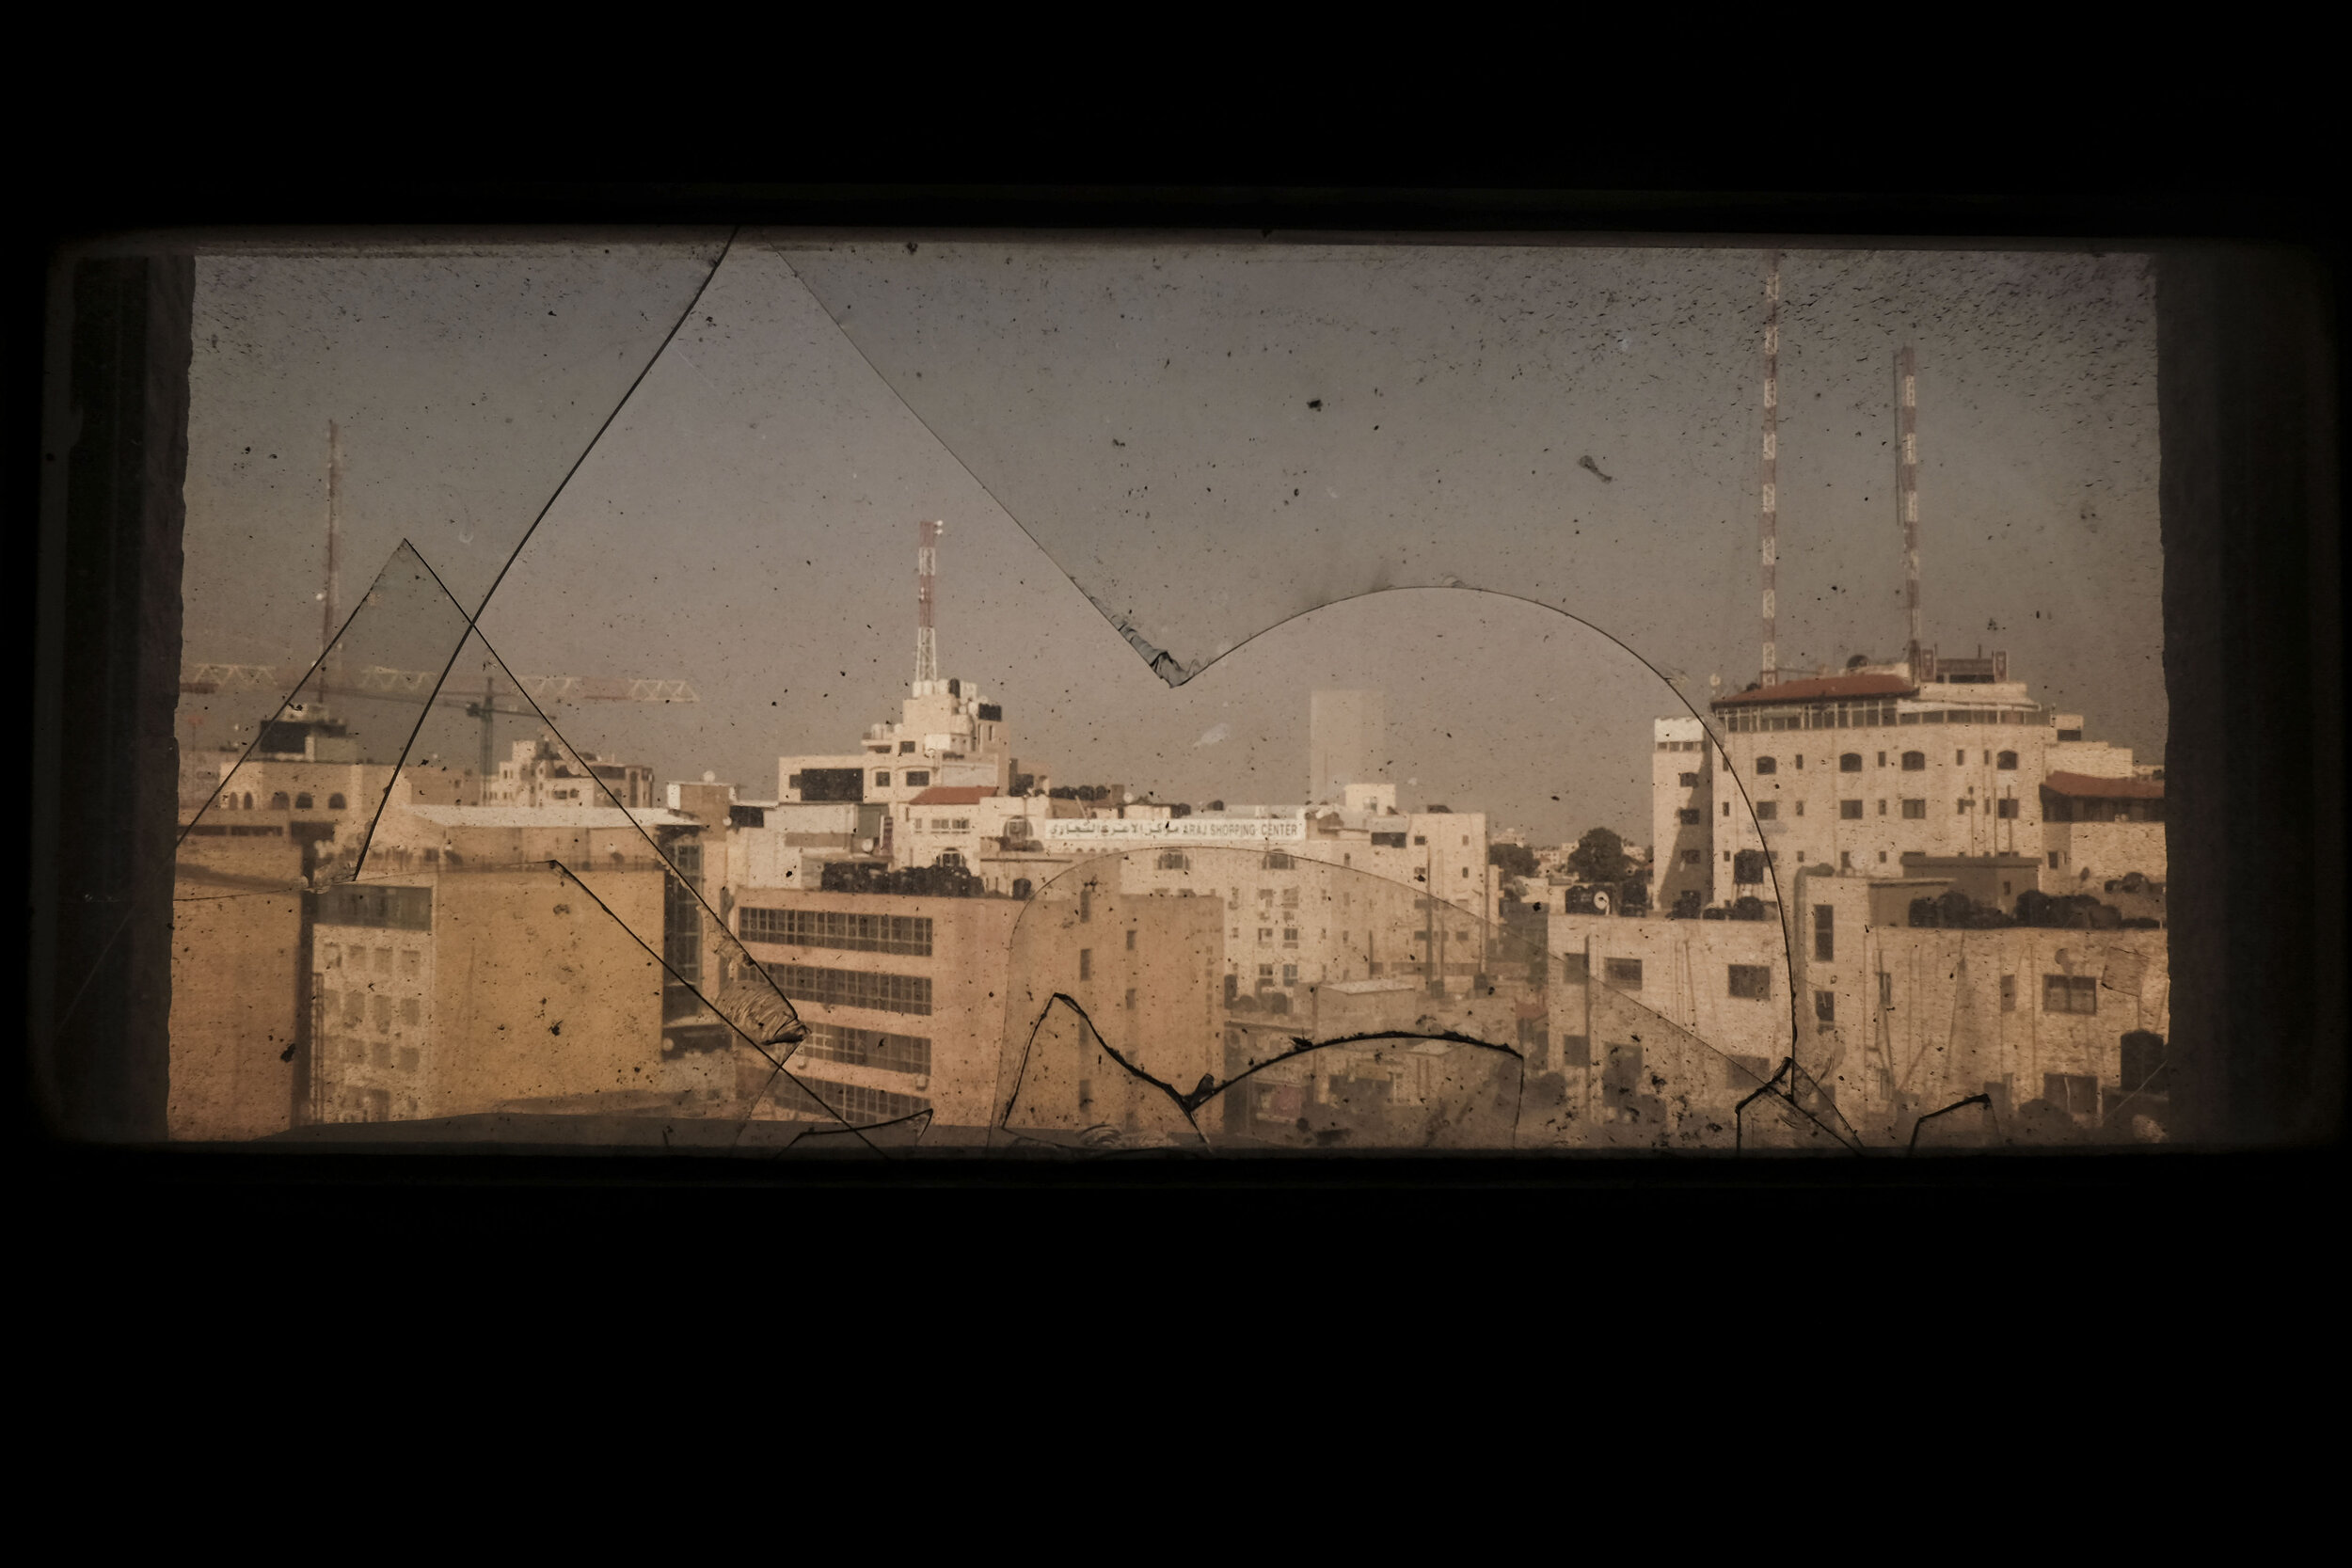  A view of Ramallah from a broken window in a high rise skyscraper near Al-Manara Square in the Occupied West Bank. While once a land of shepherds and olive trees, Ramallah has been transitioning away from agriculture and is becoming increasingly urb